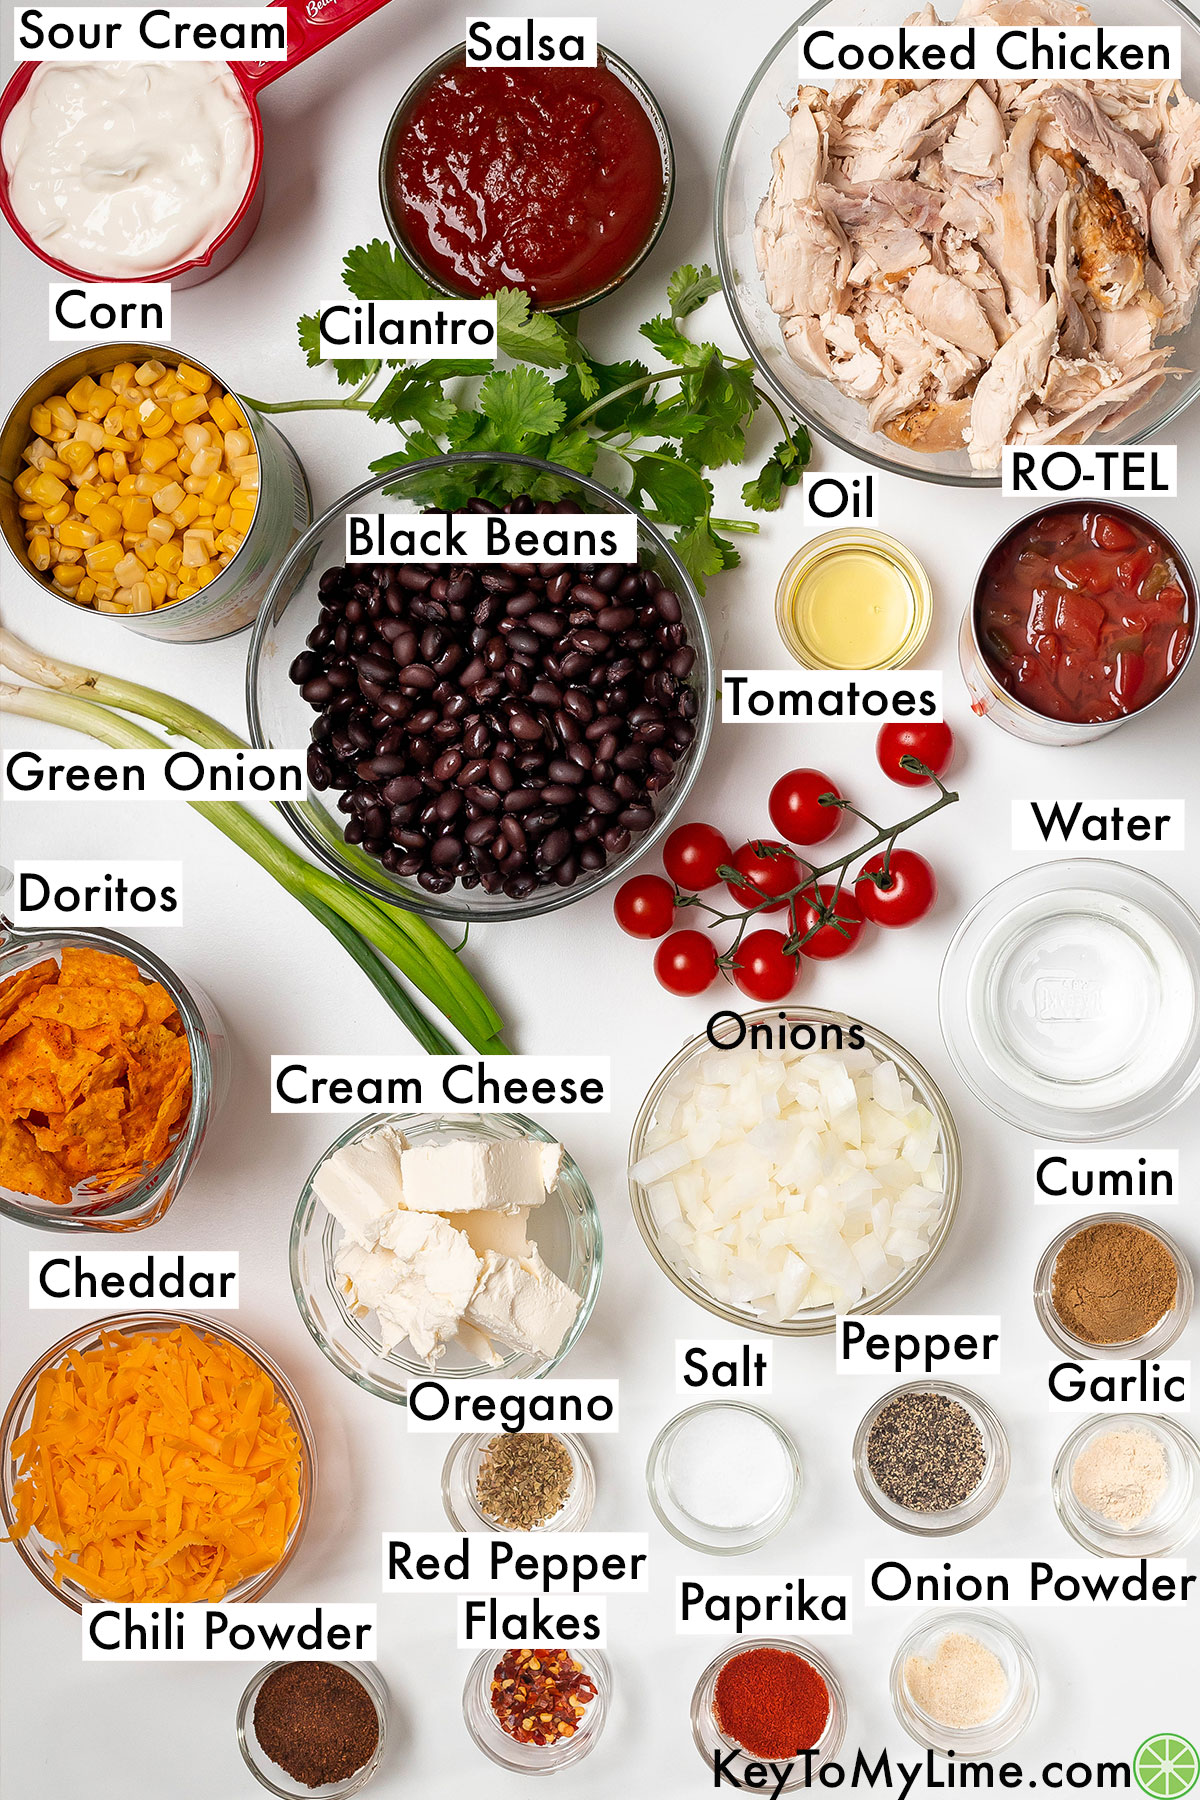 The labeled ingredients for chicken dorito casserole.